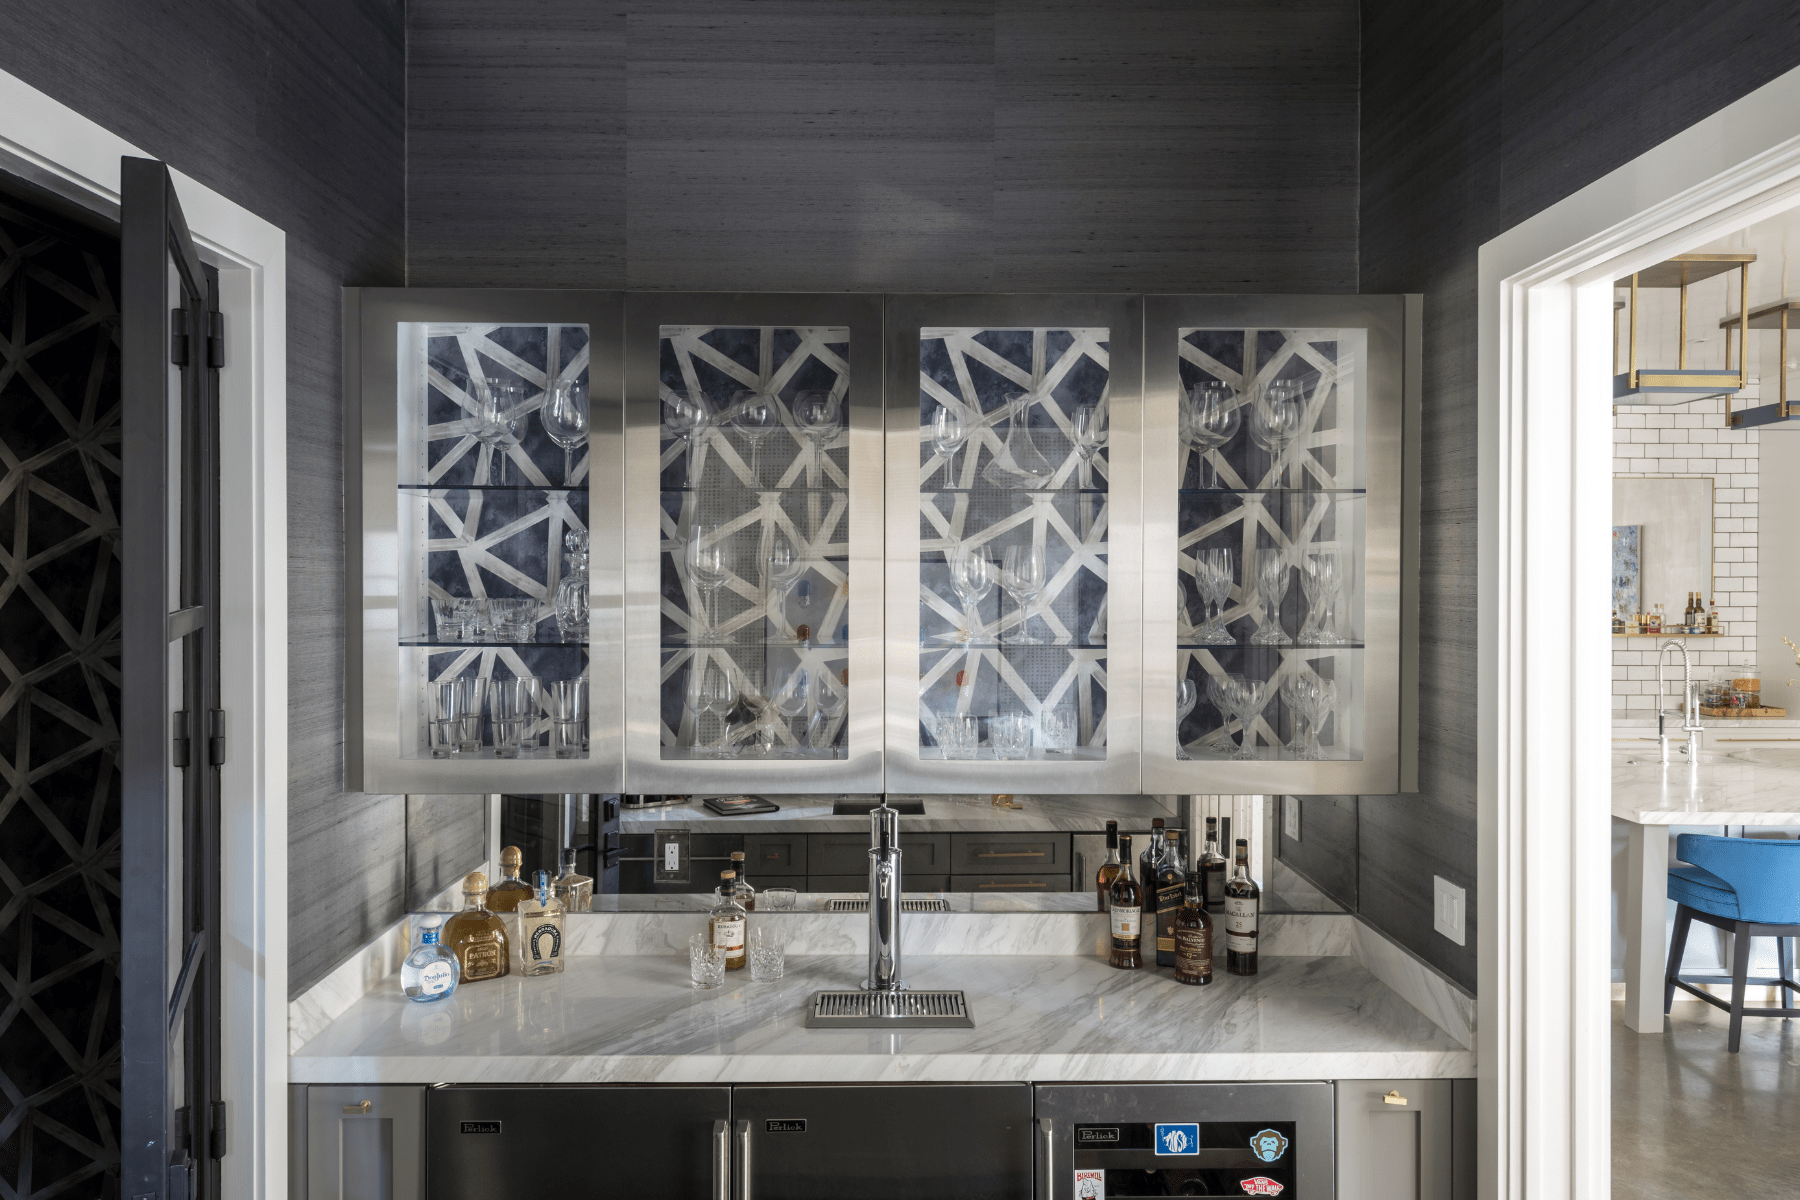 The luxurious Drexel bar featuring a marble countertop and bold wallpaper in the cabinetry.